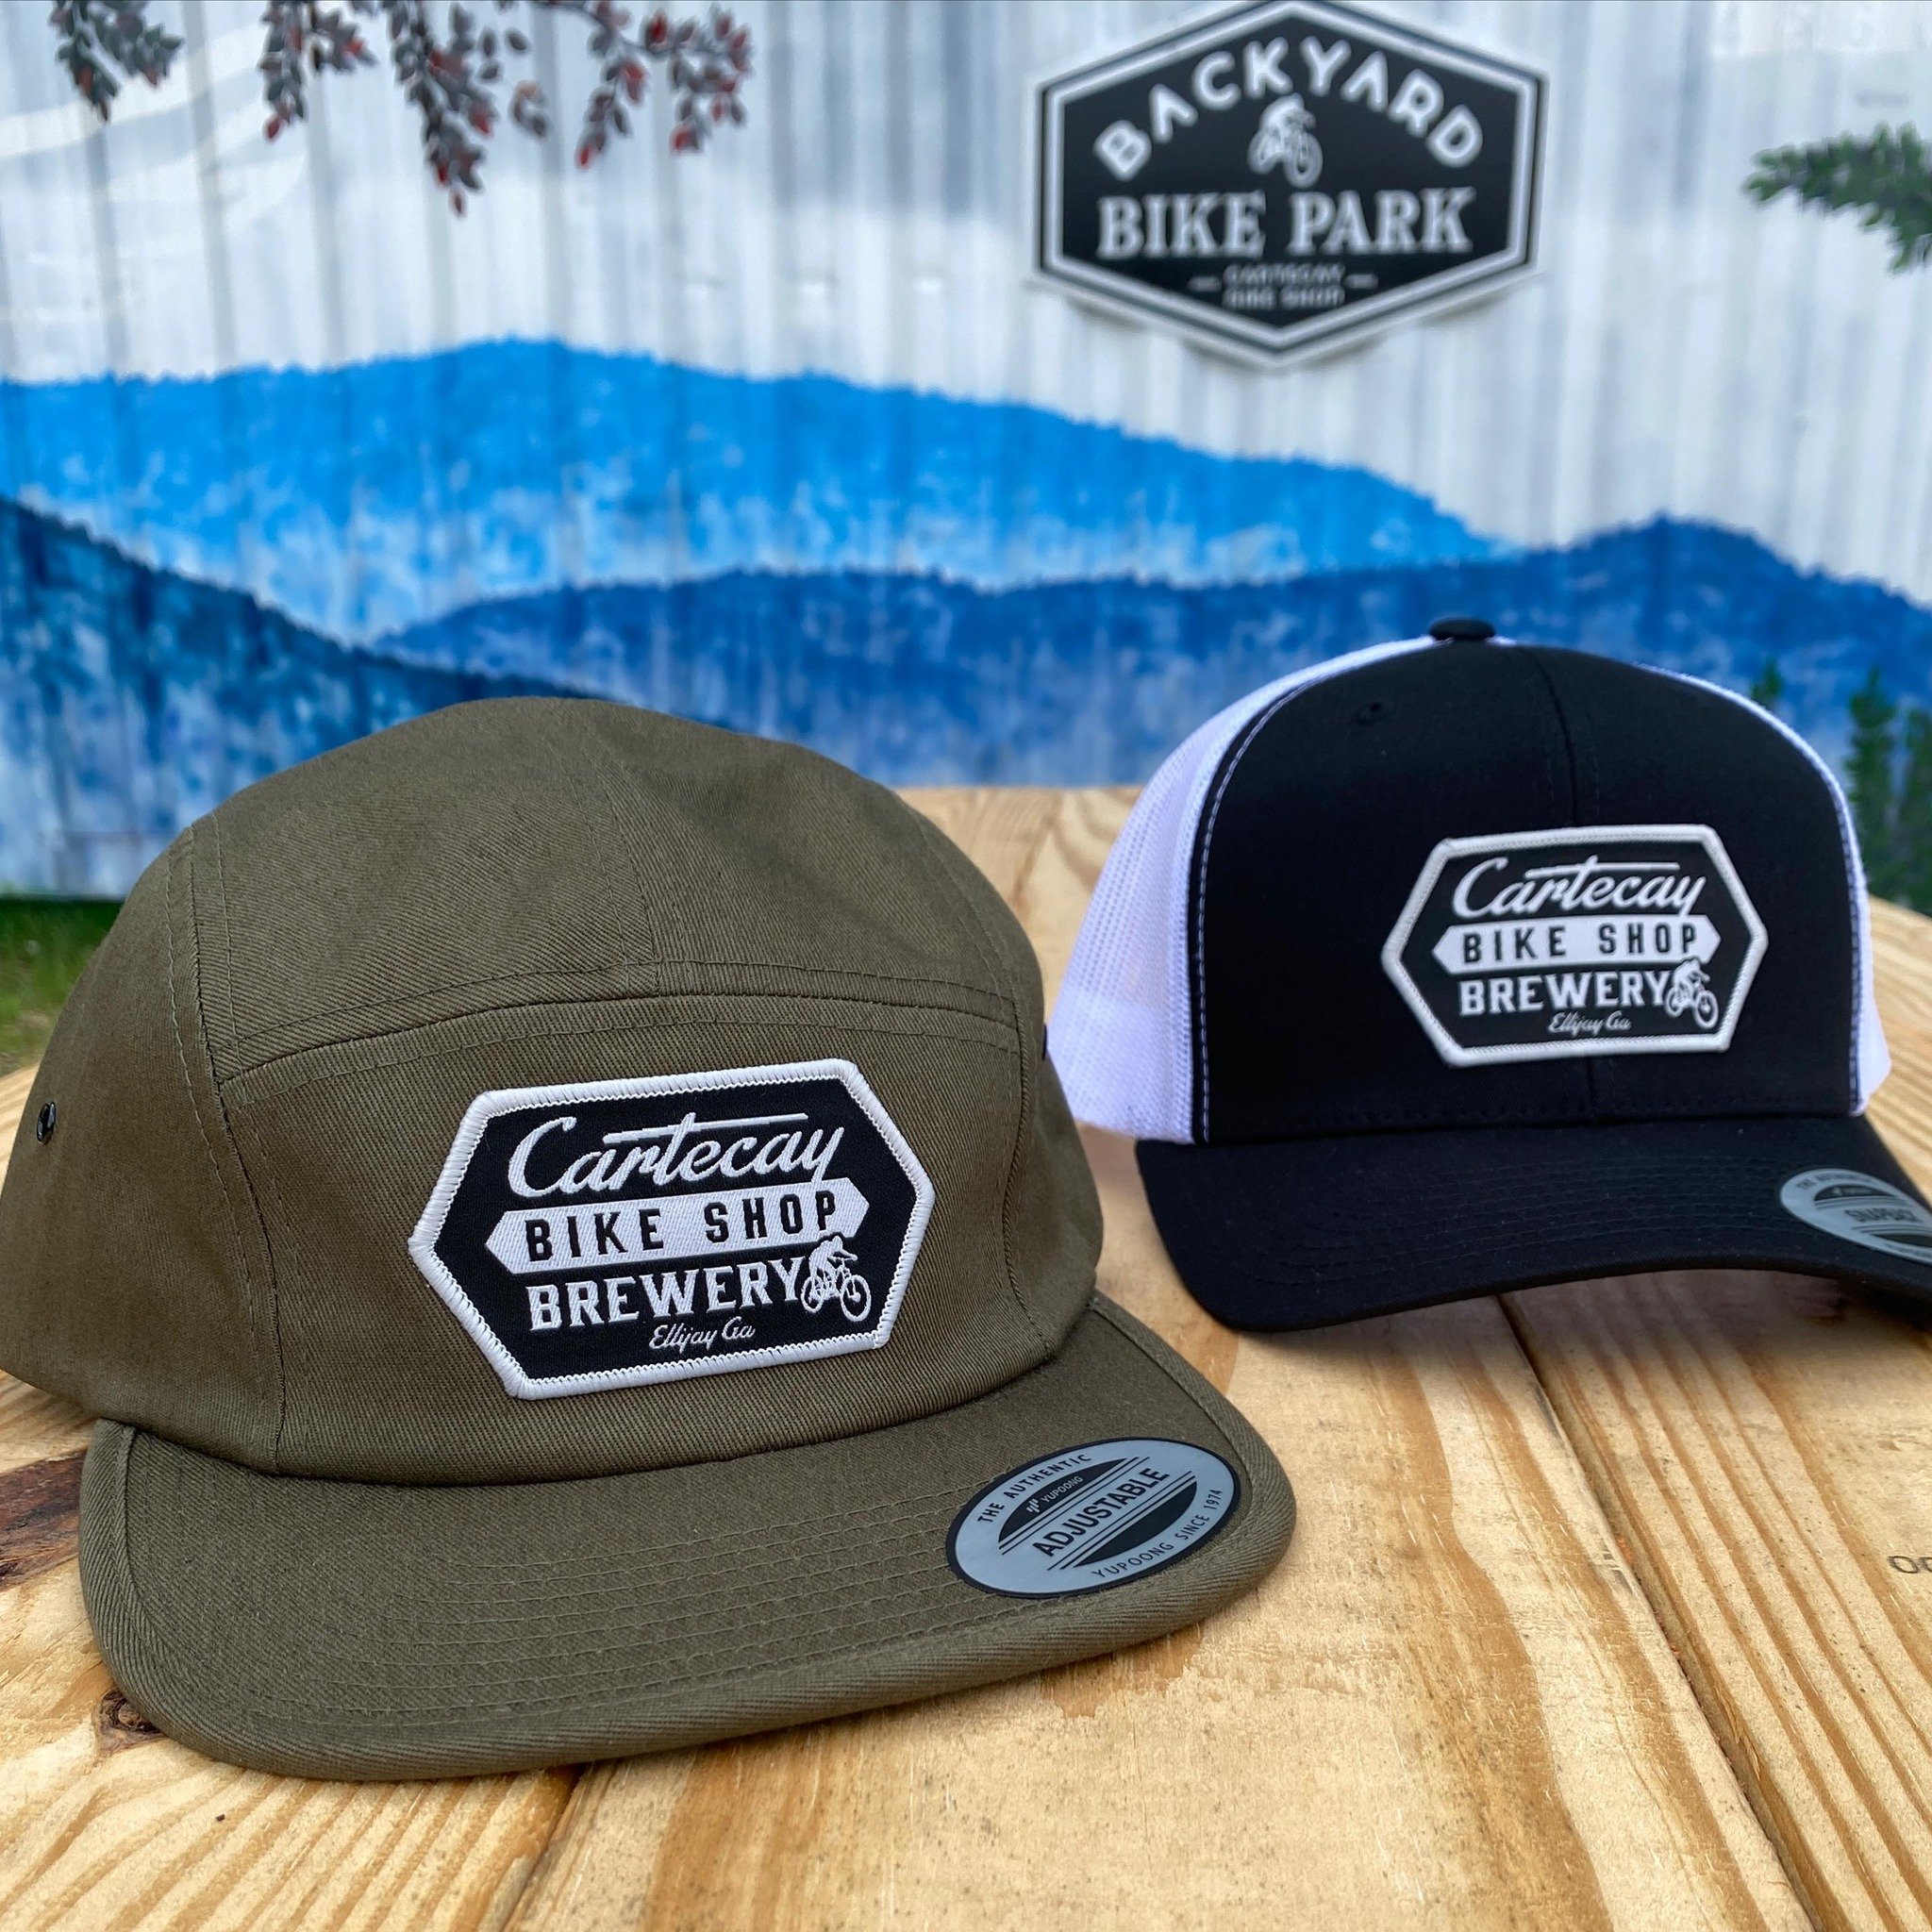 Brewery hats now available. See you this weekend!